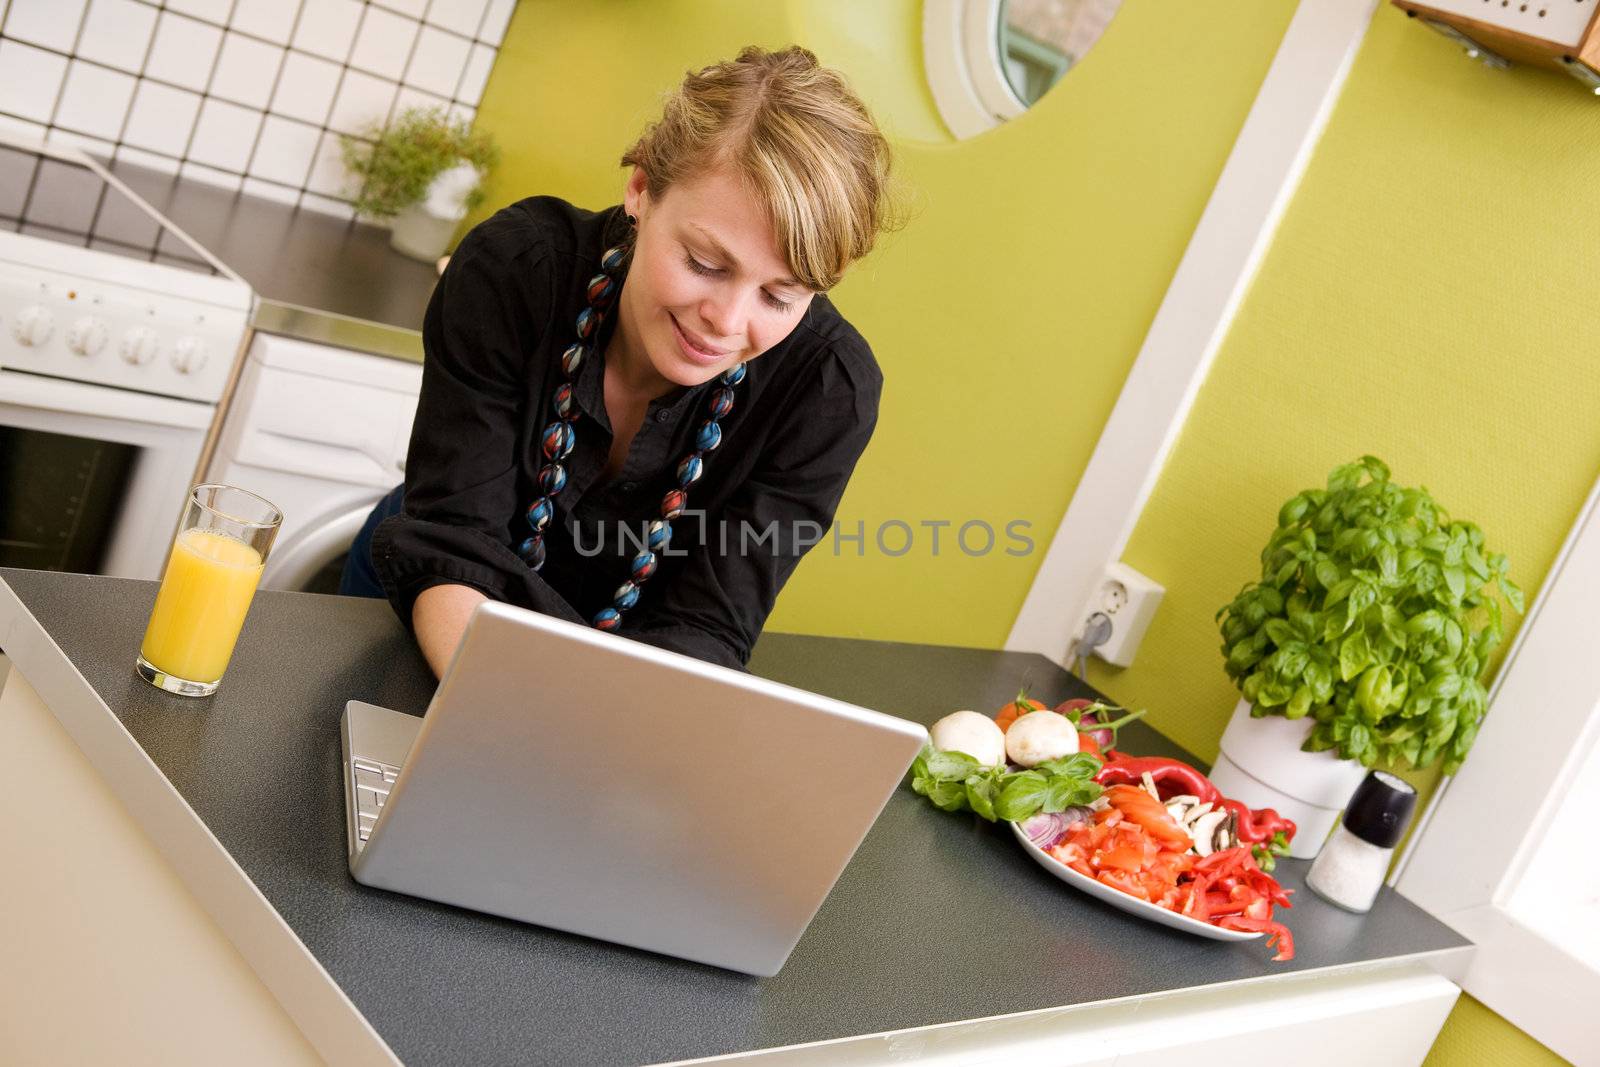 A young woman using the computer while eating a healthy snack in an apartment kitchen;